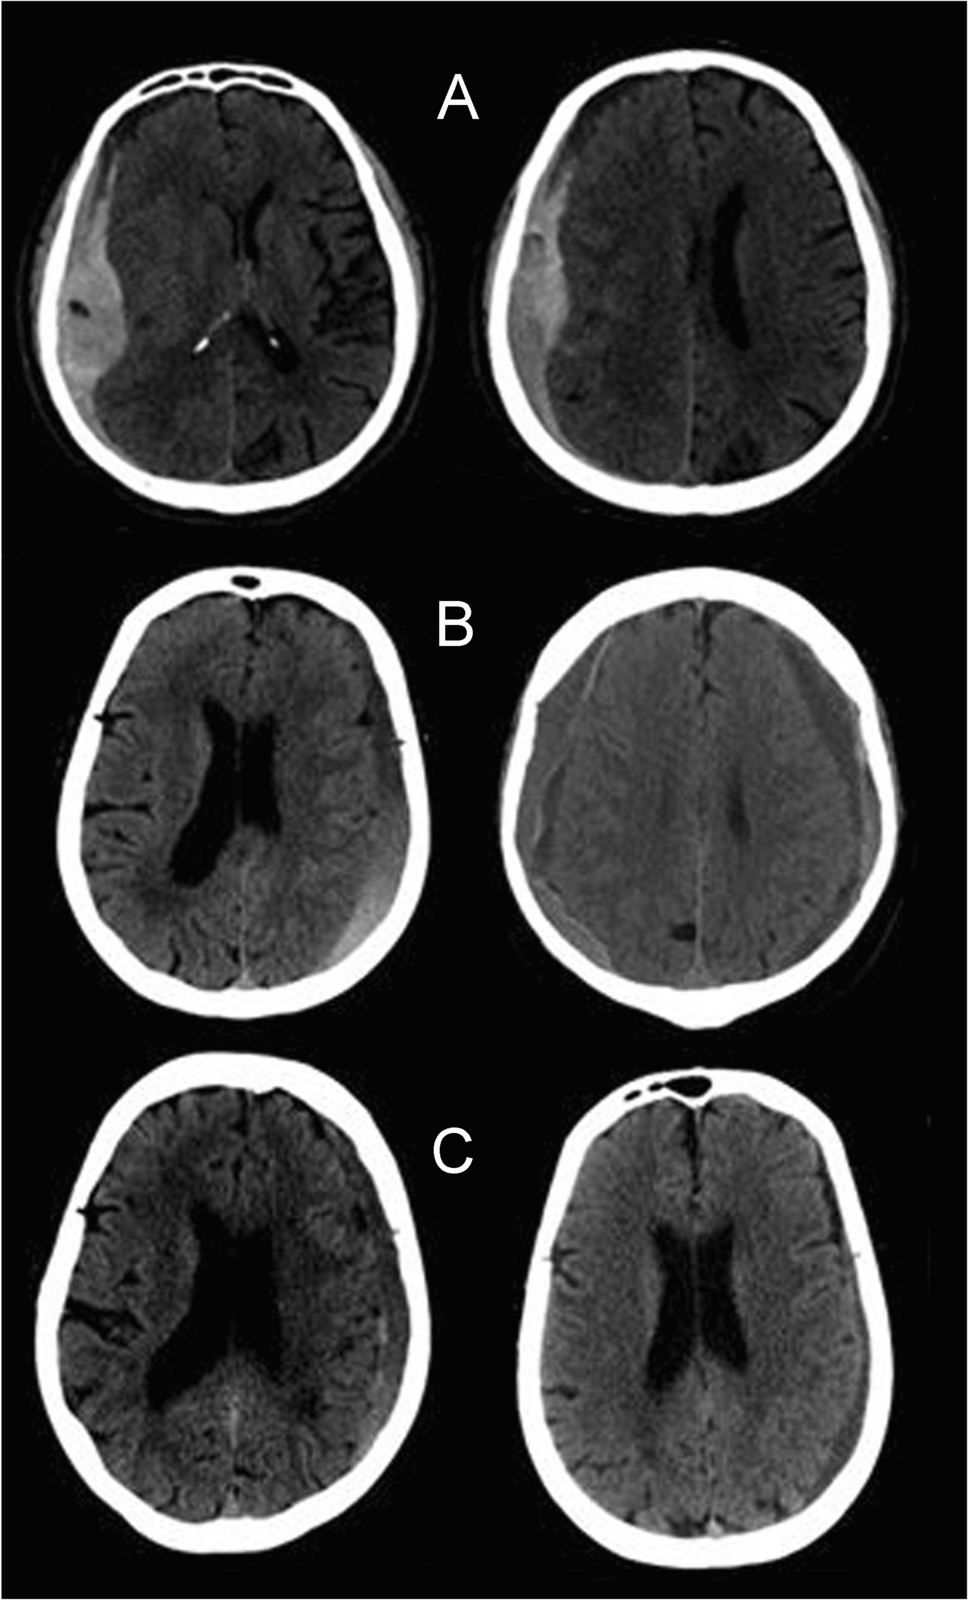 Establishment and validation of a CT-based prediction model for the good dissolution of mild chronic subdural hematoma with atorvastatin treatment